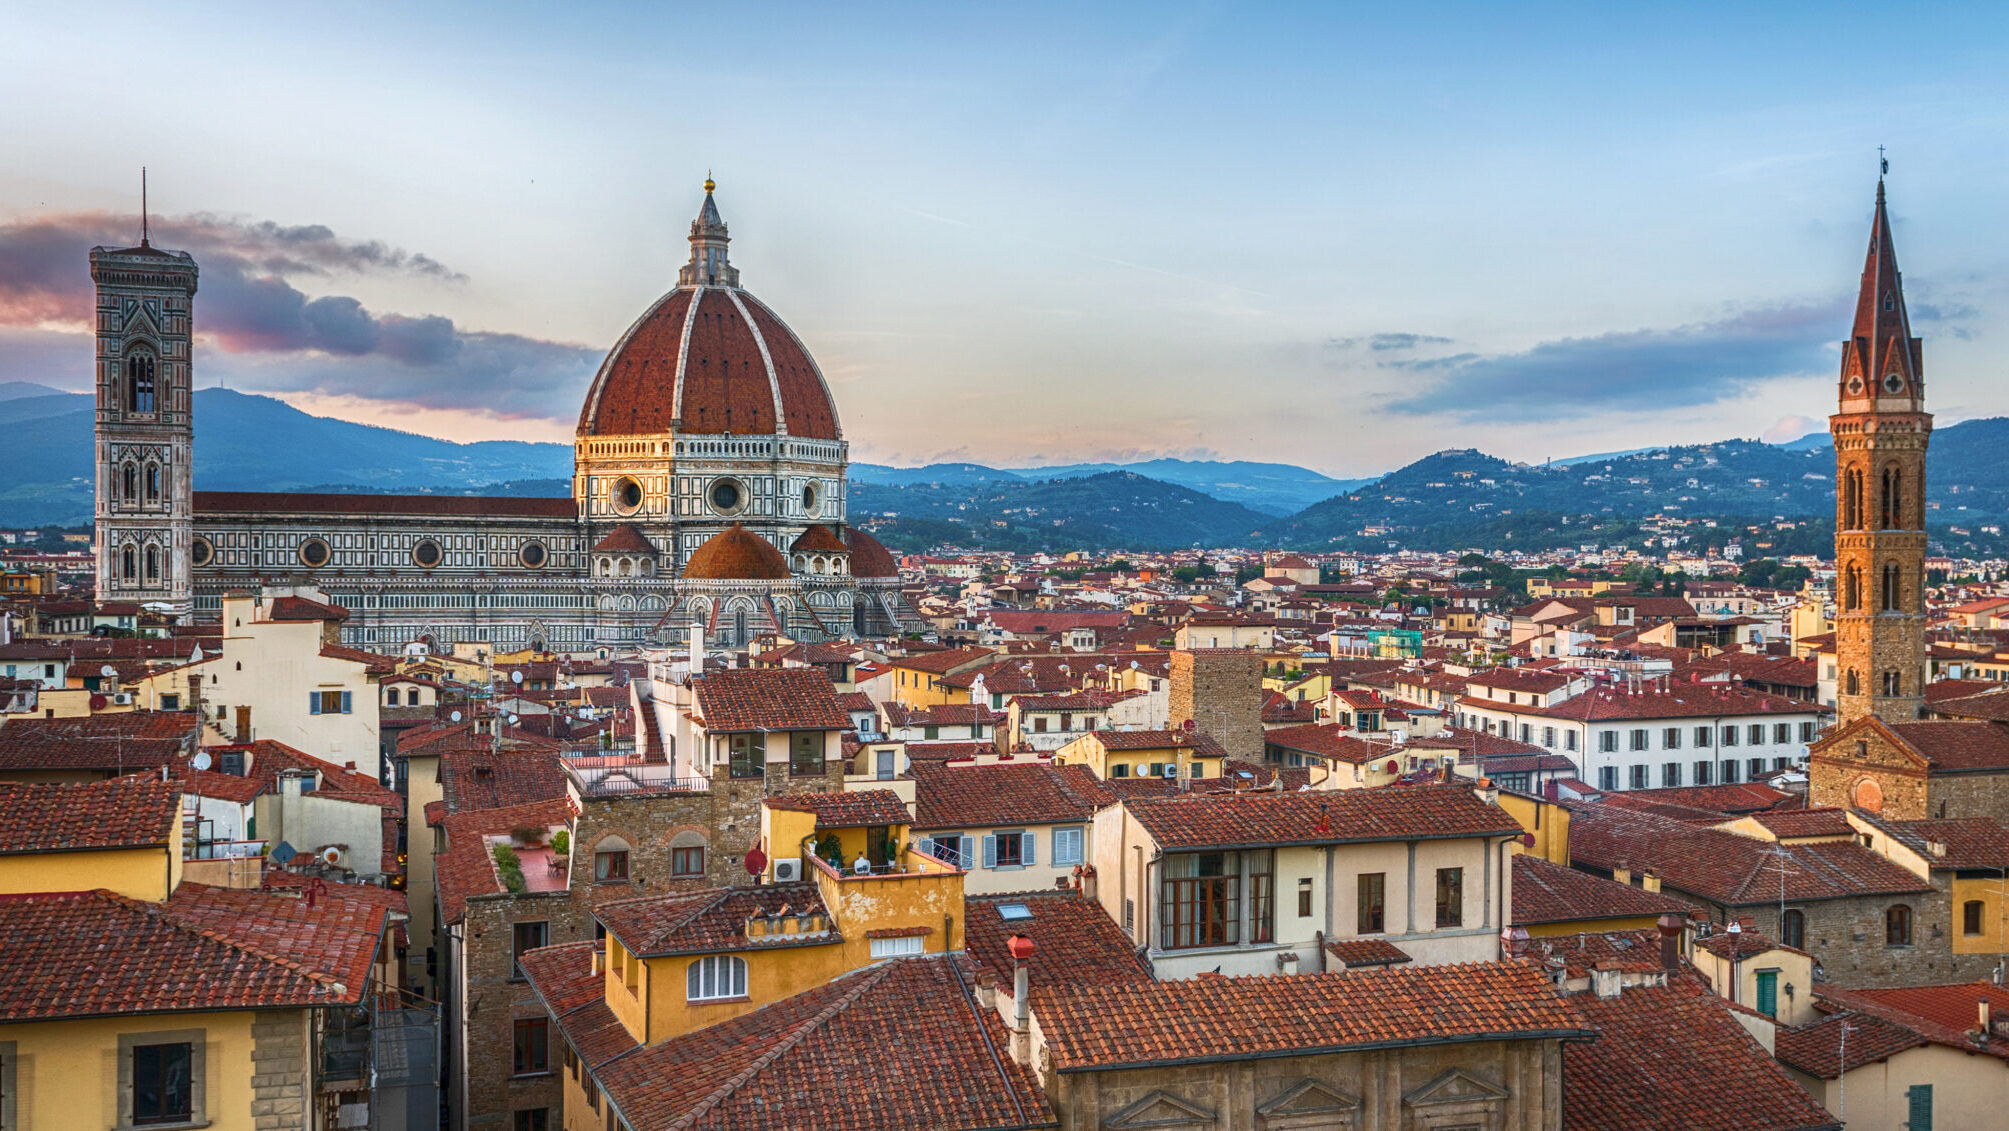 Panoramic view of Florence, with the Duomo dome and roofs